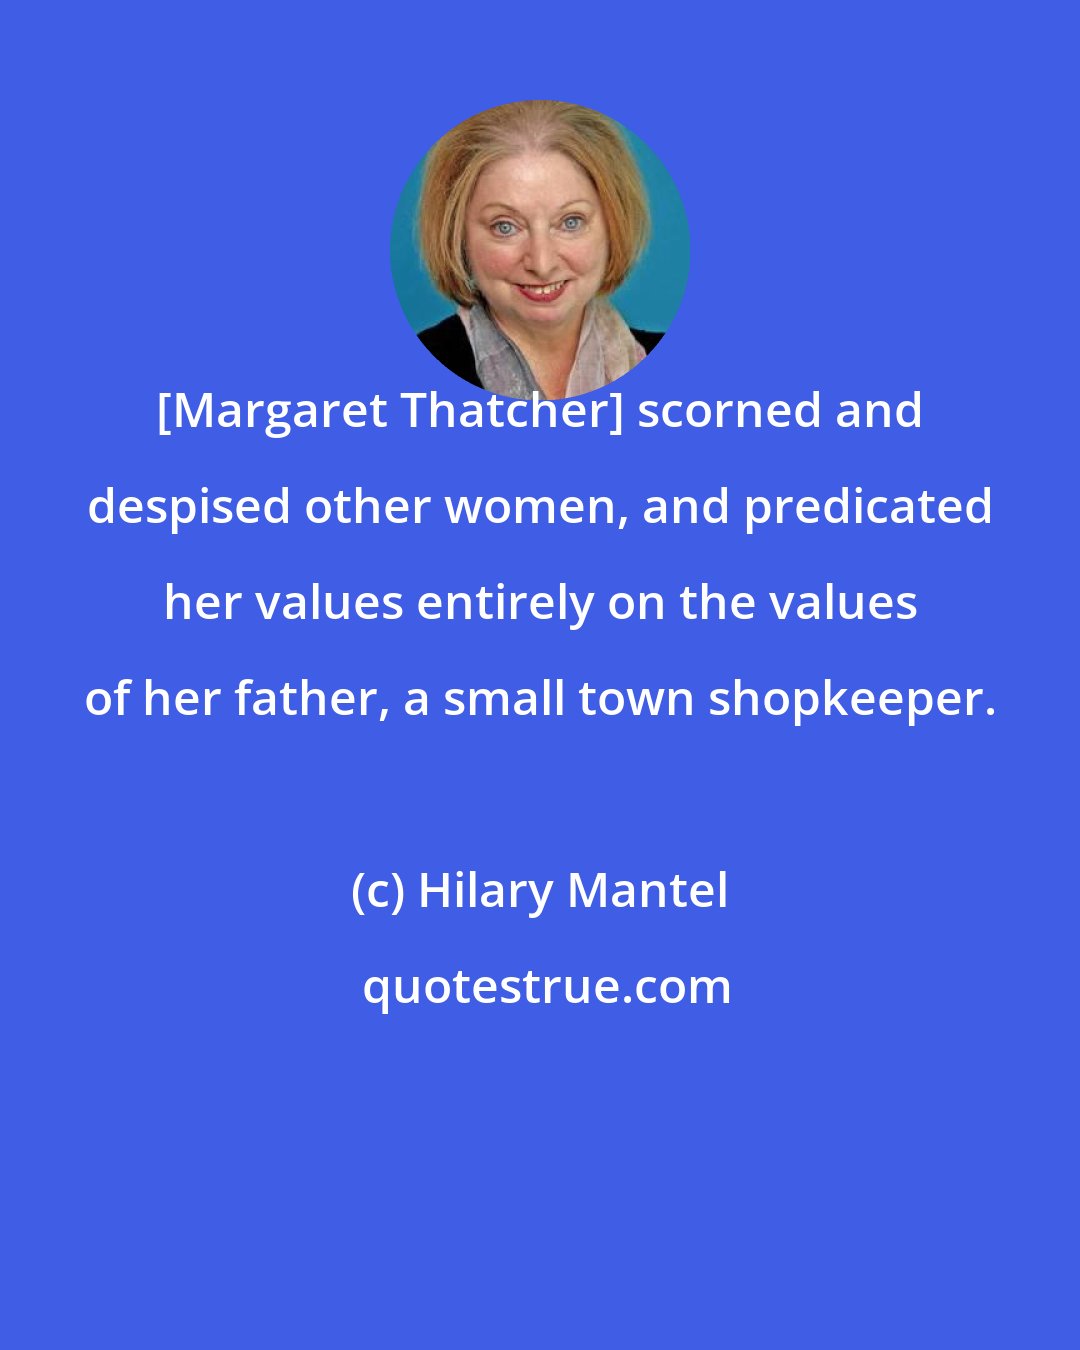 Hilary Mantel: [Margaret Thatcher] scorned and despised other women, and predicated her values entirely on the values of her father, a small town shopkeeper.